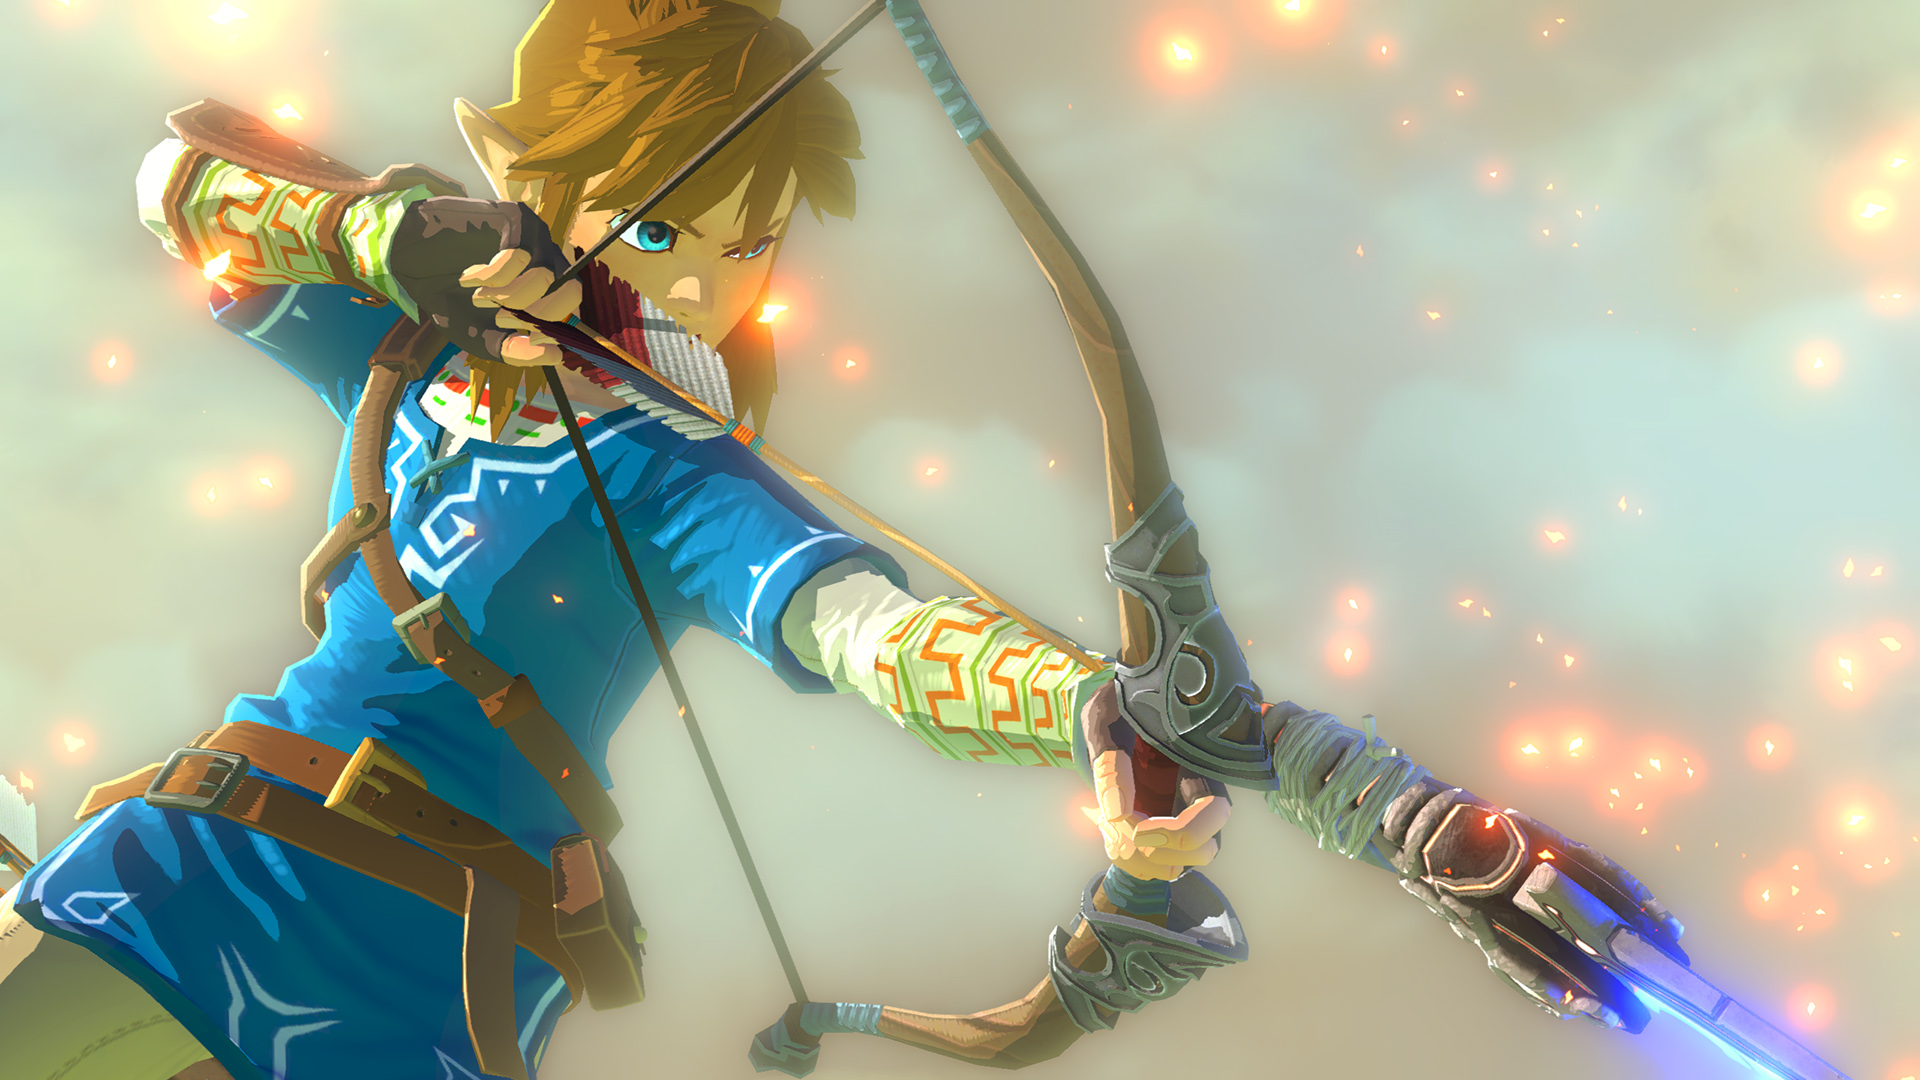 The SideQuest May 21, 2015: Nintendo E3 Predictions